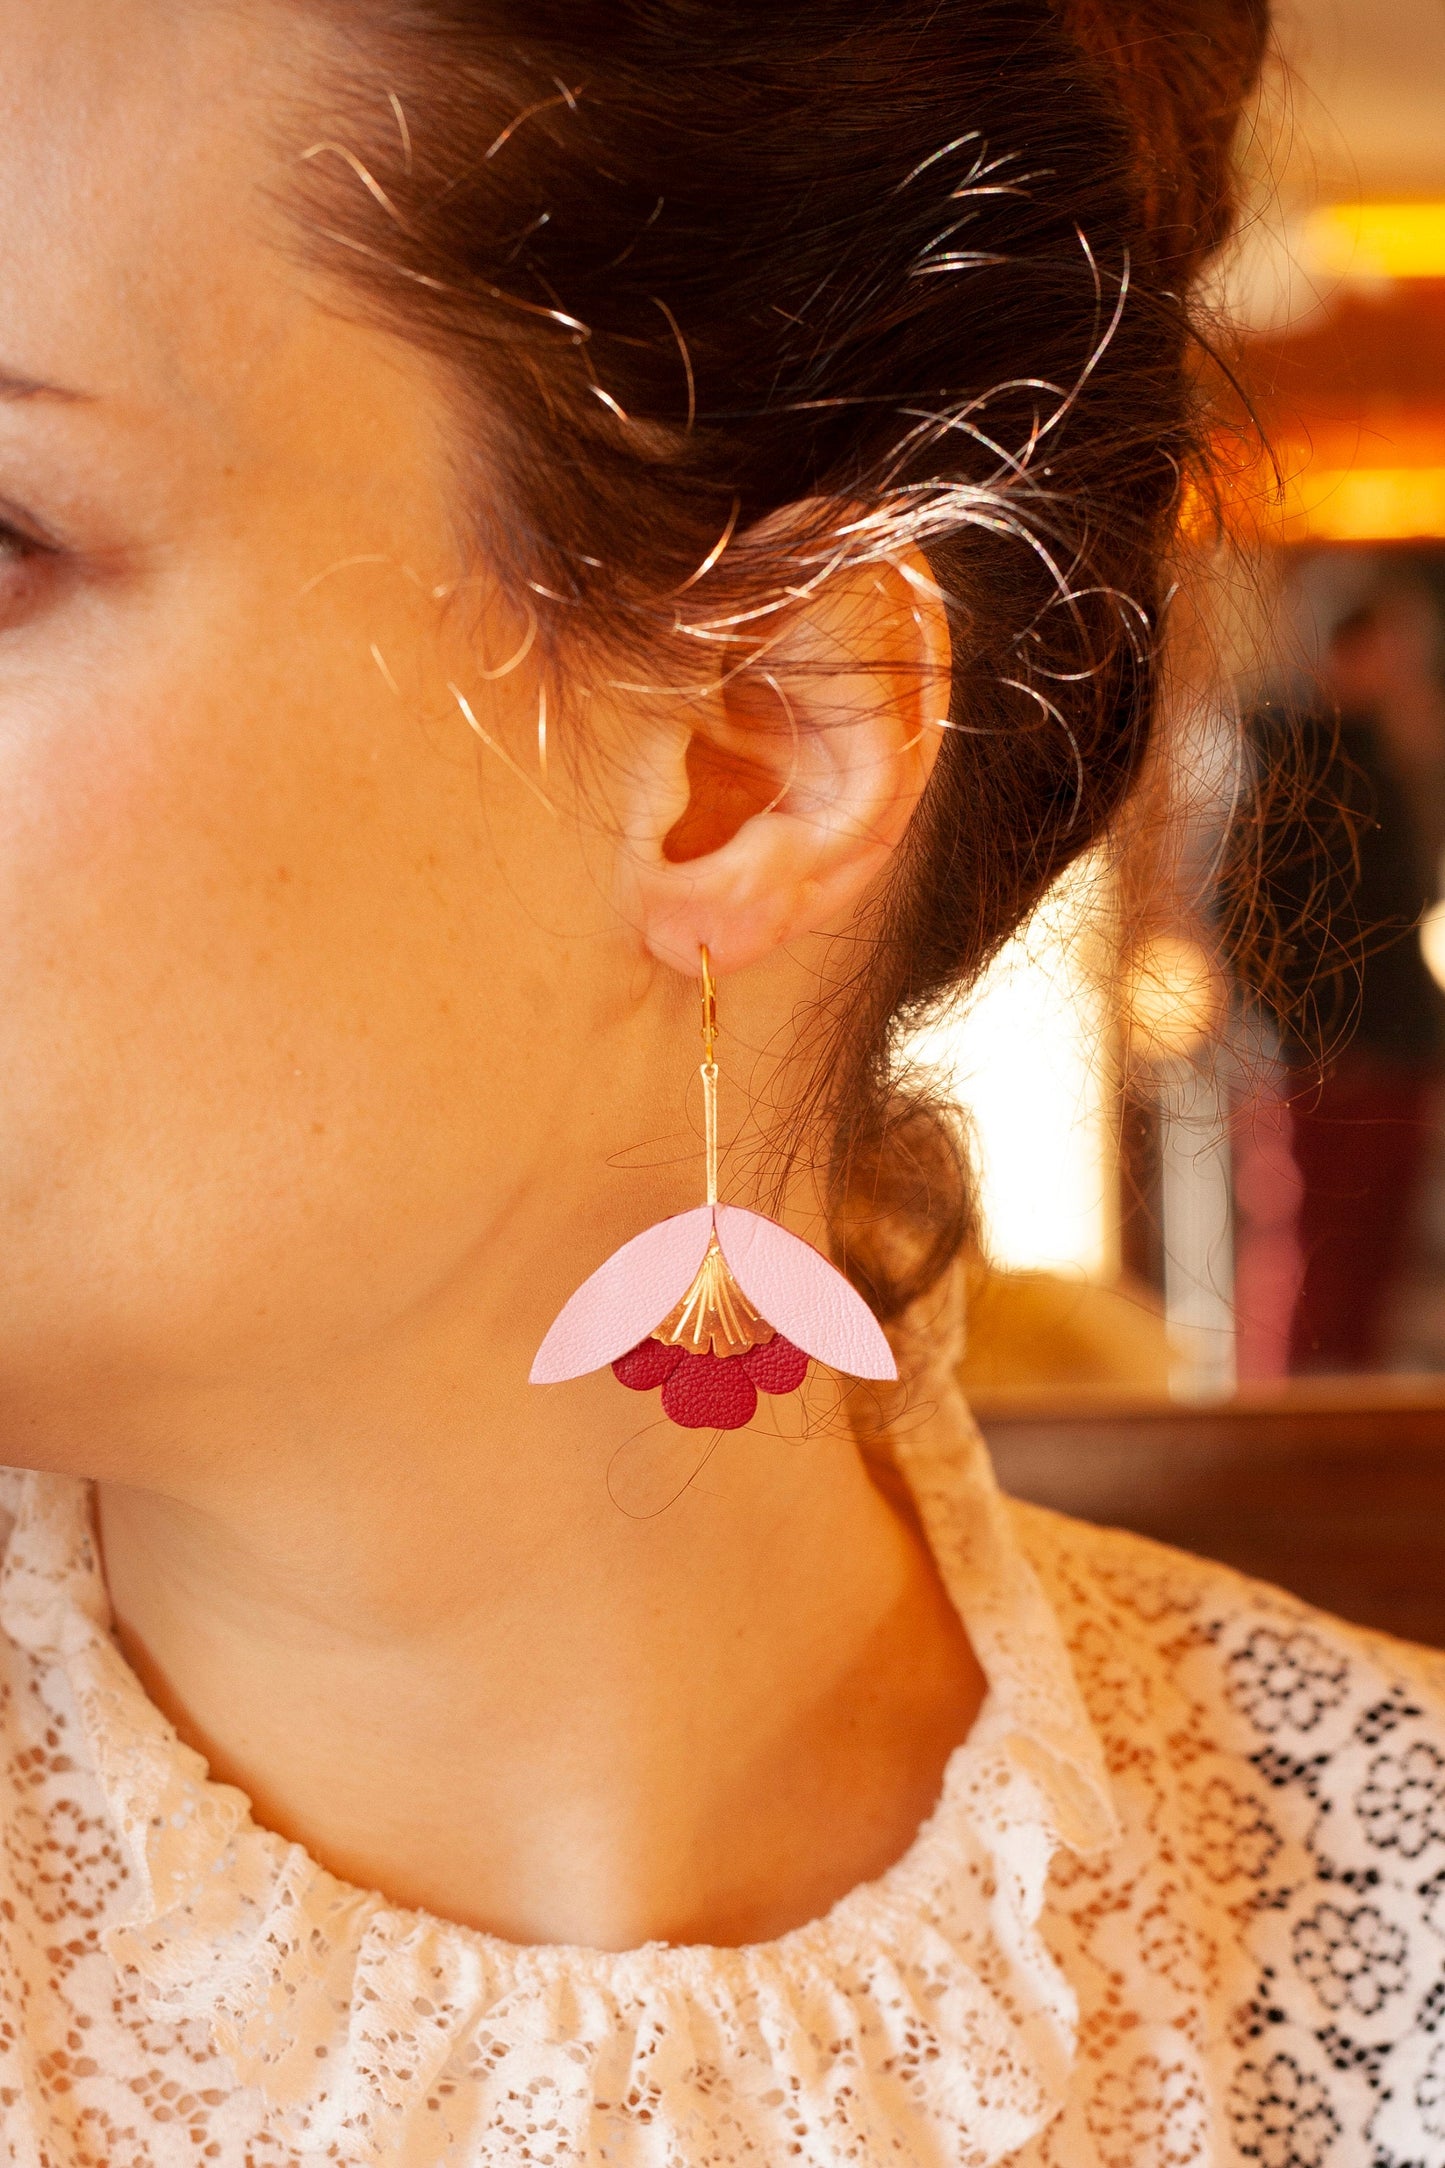 Ginkgo Flower earrings in bronze and copper red leather